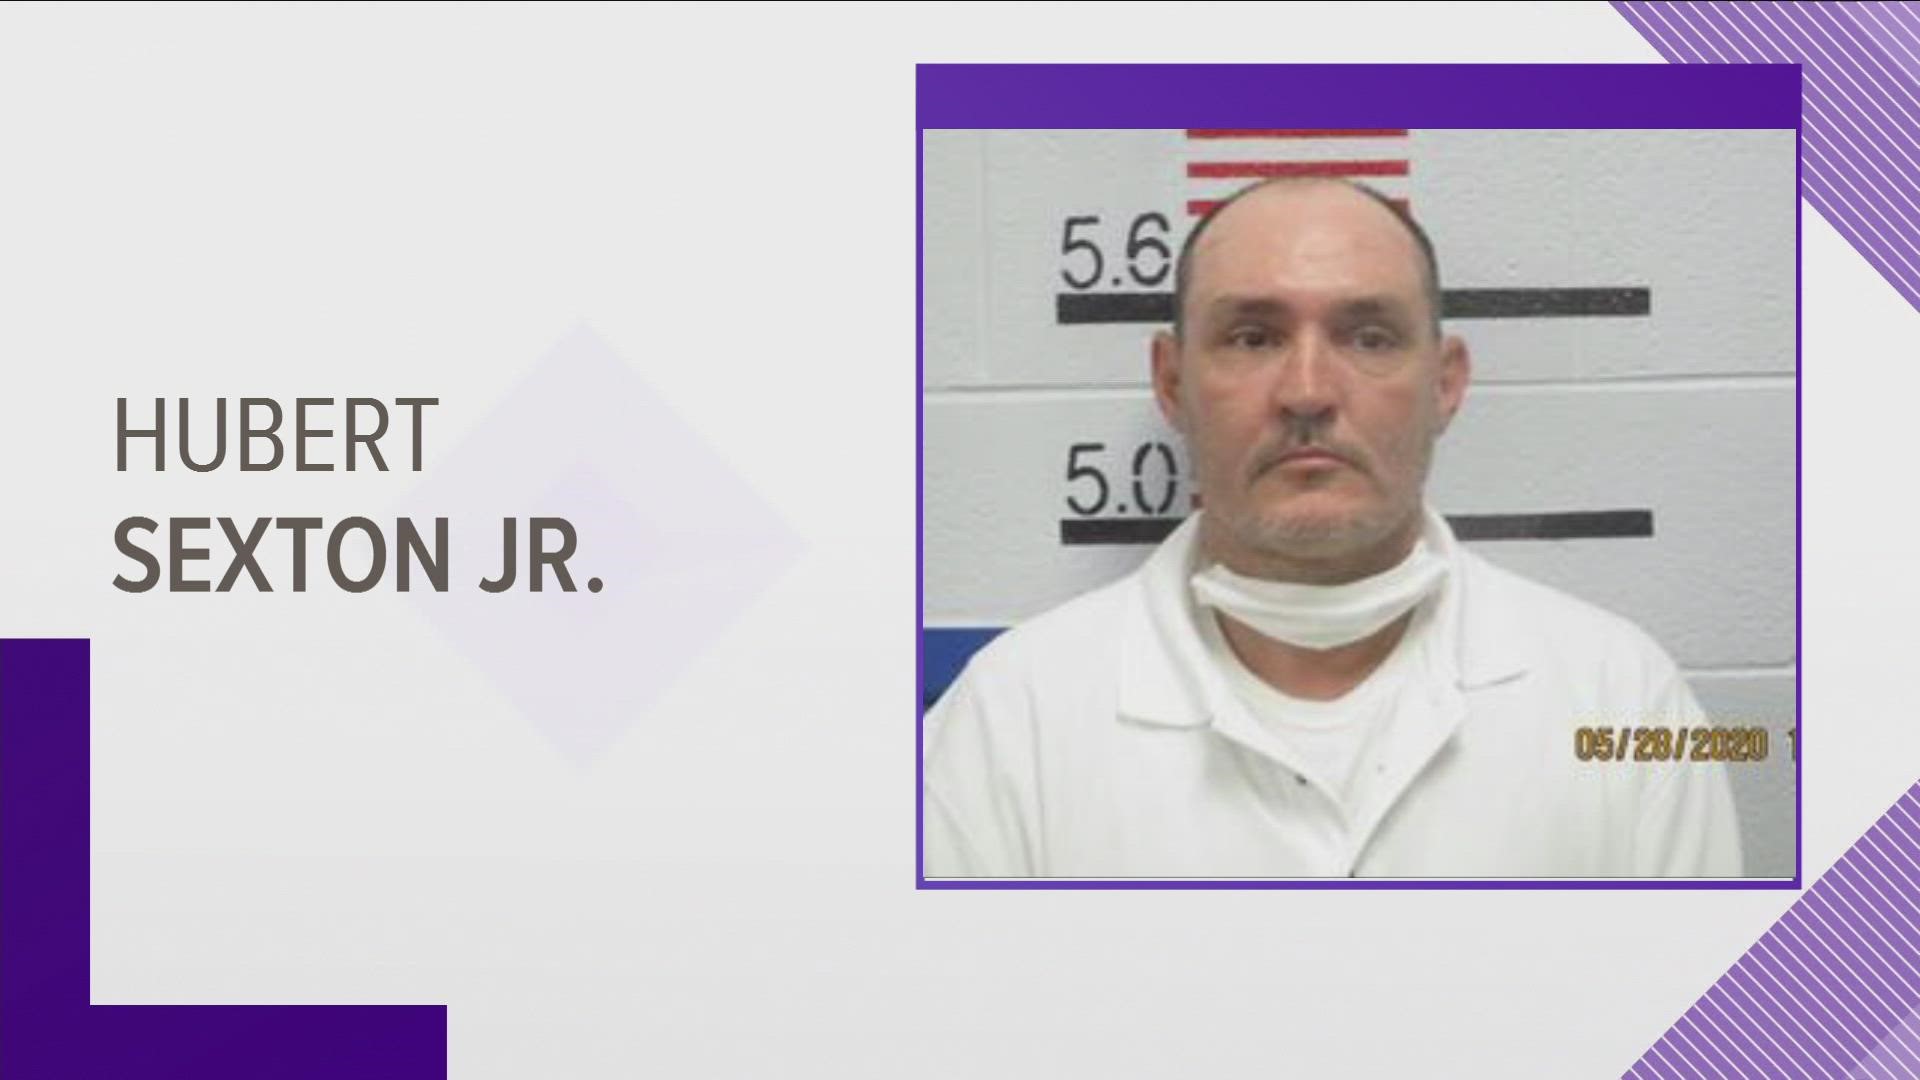 Authorities said that Hubert Glen Sexton Jr. was sentenced to life without the possibility of parole for each count of first-degree murder.